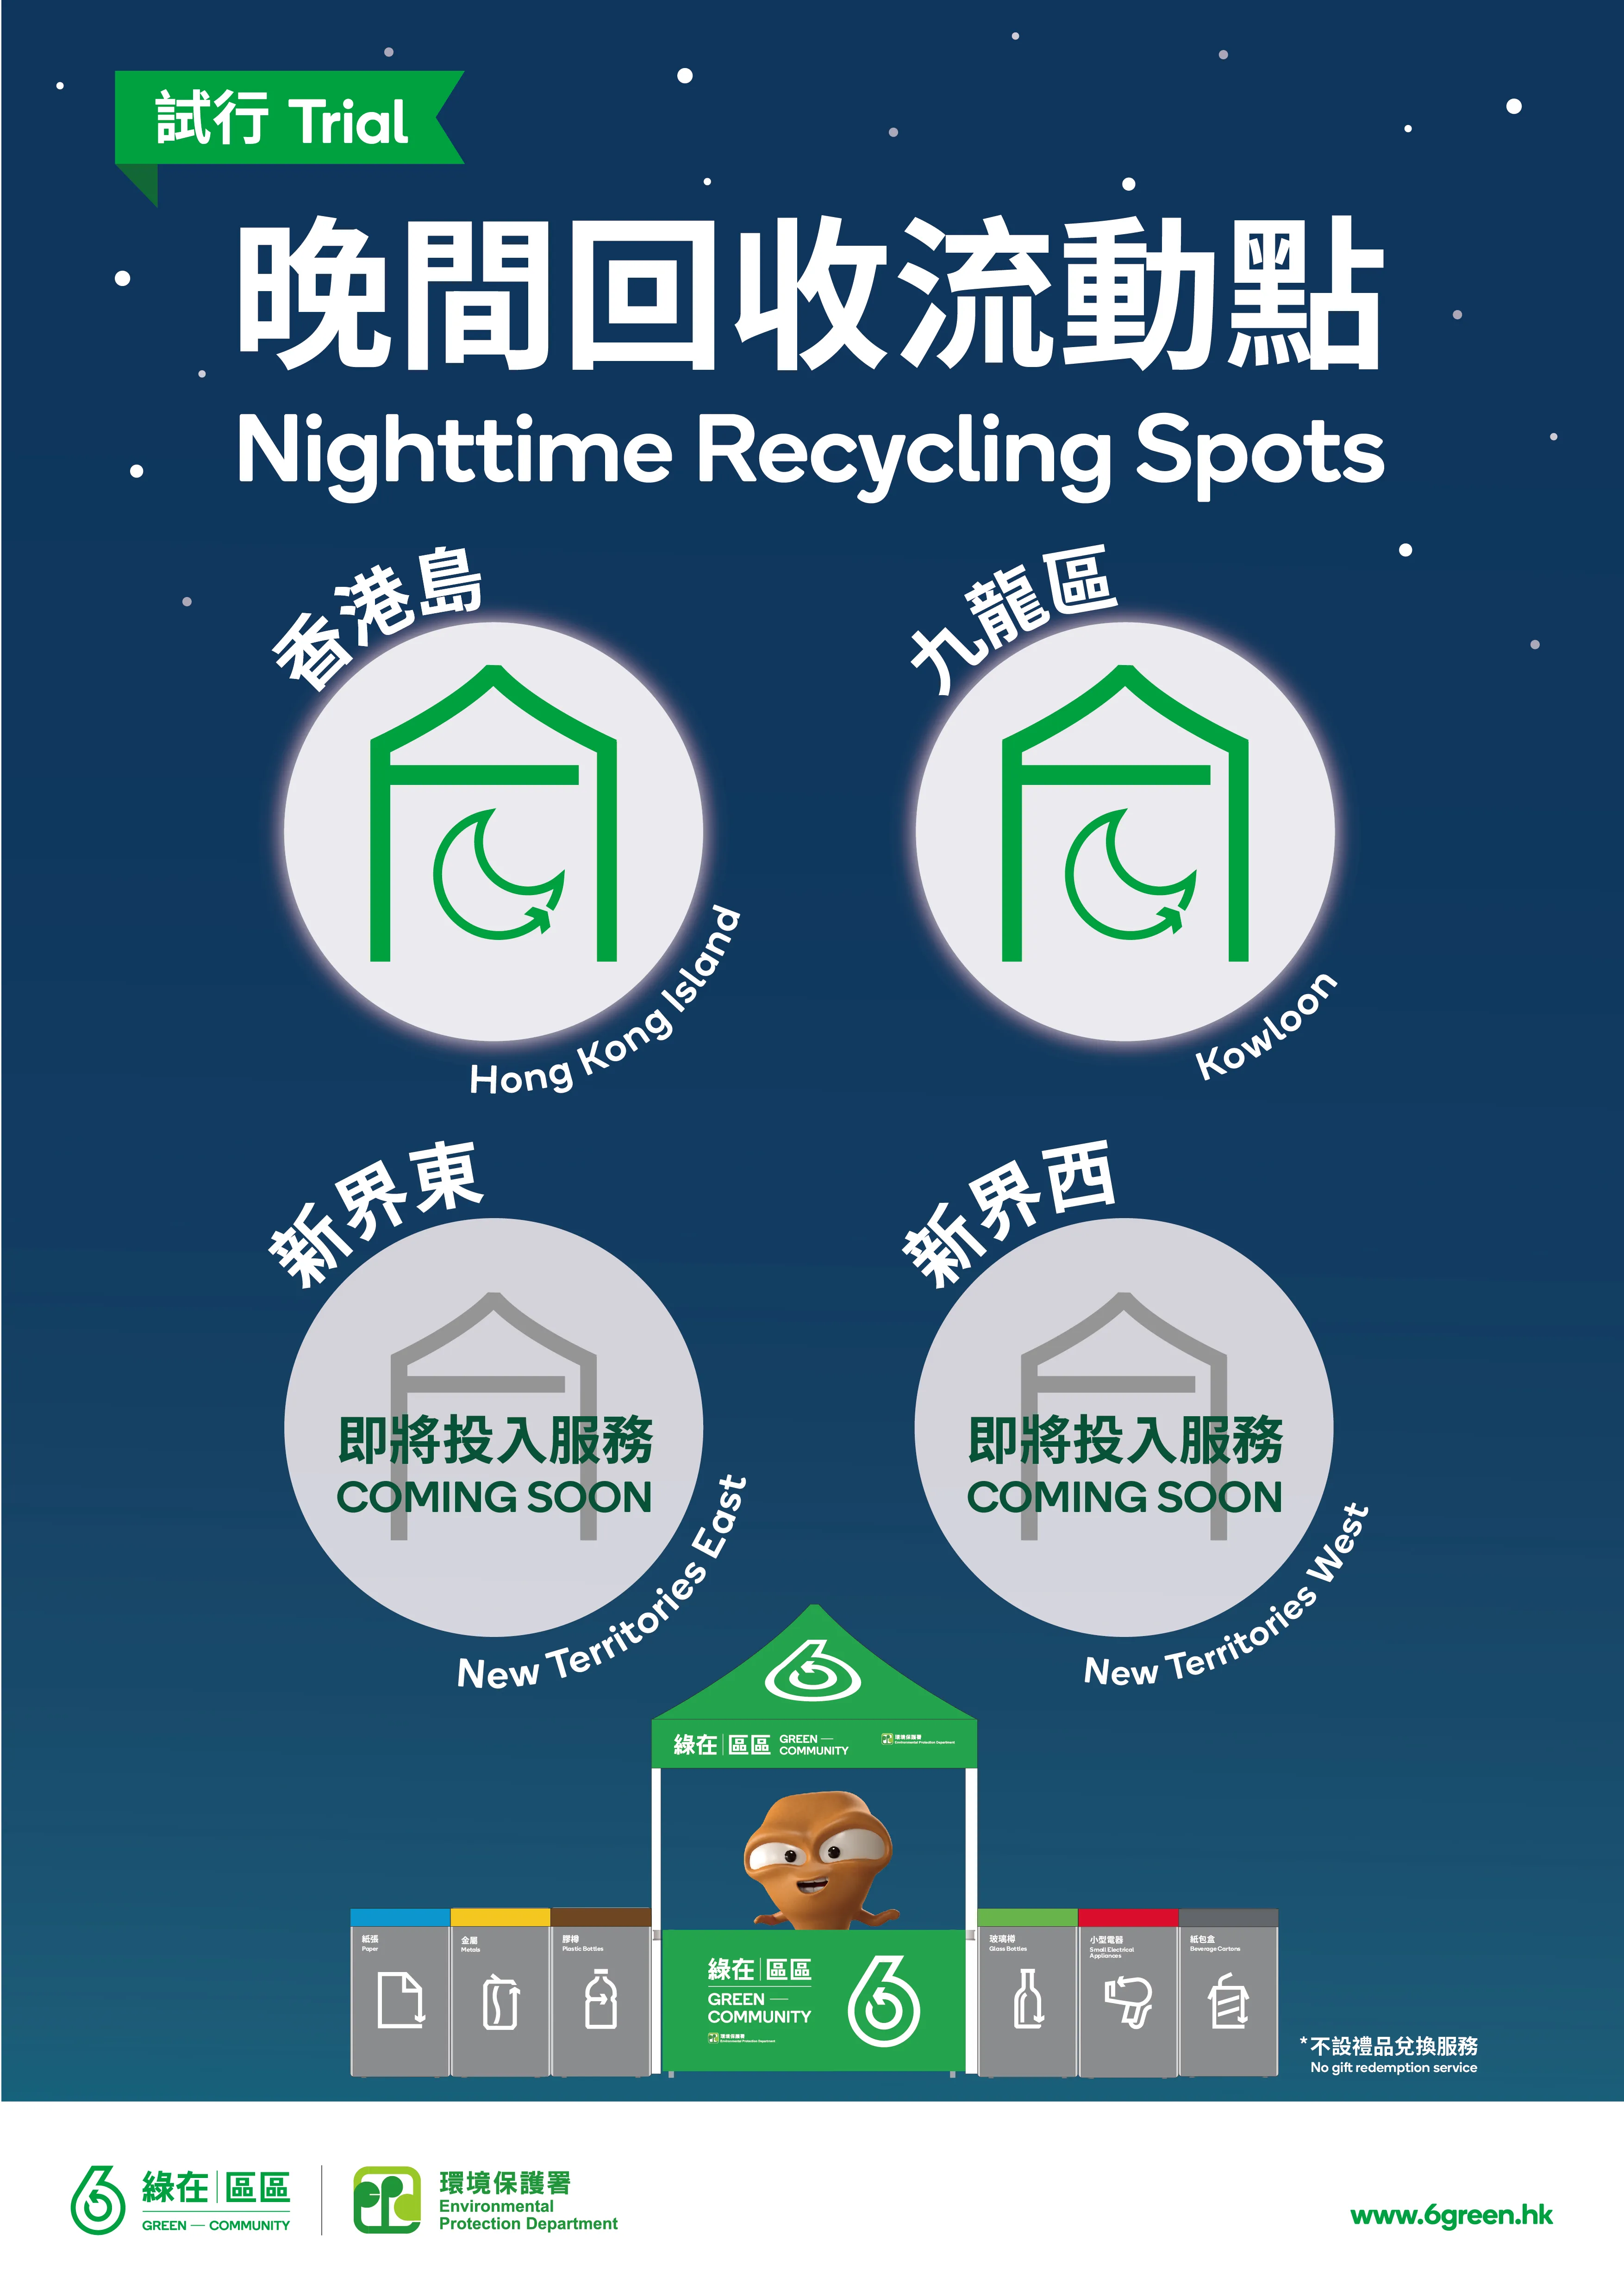 Trial Operation of Nighttime Recycling Spots Poster